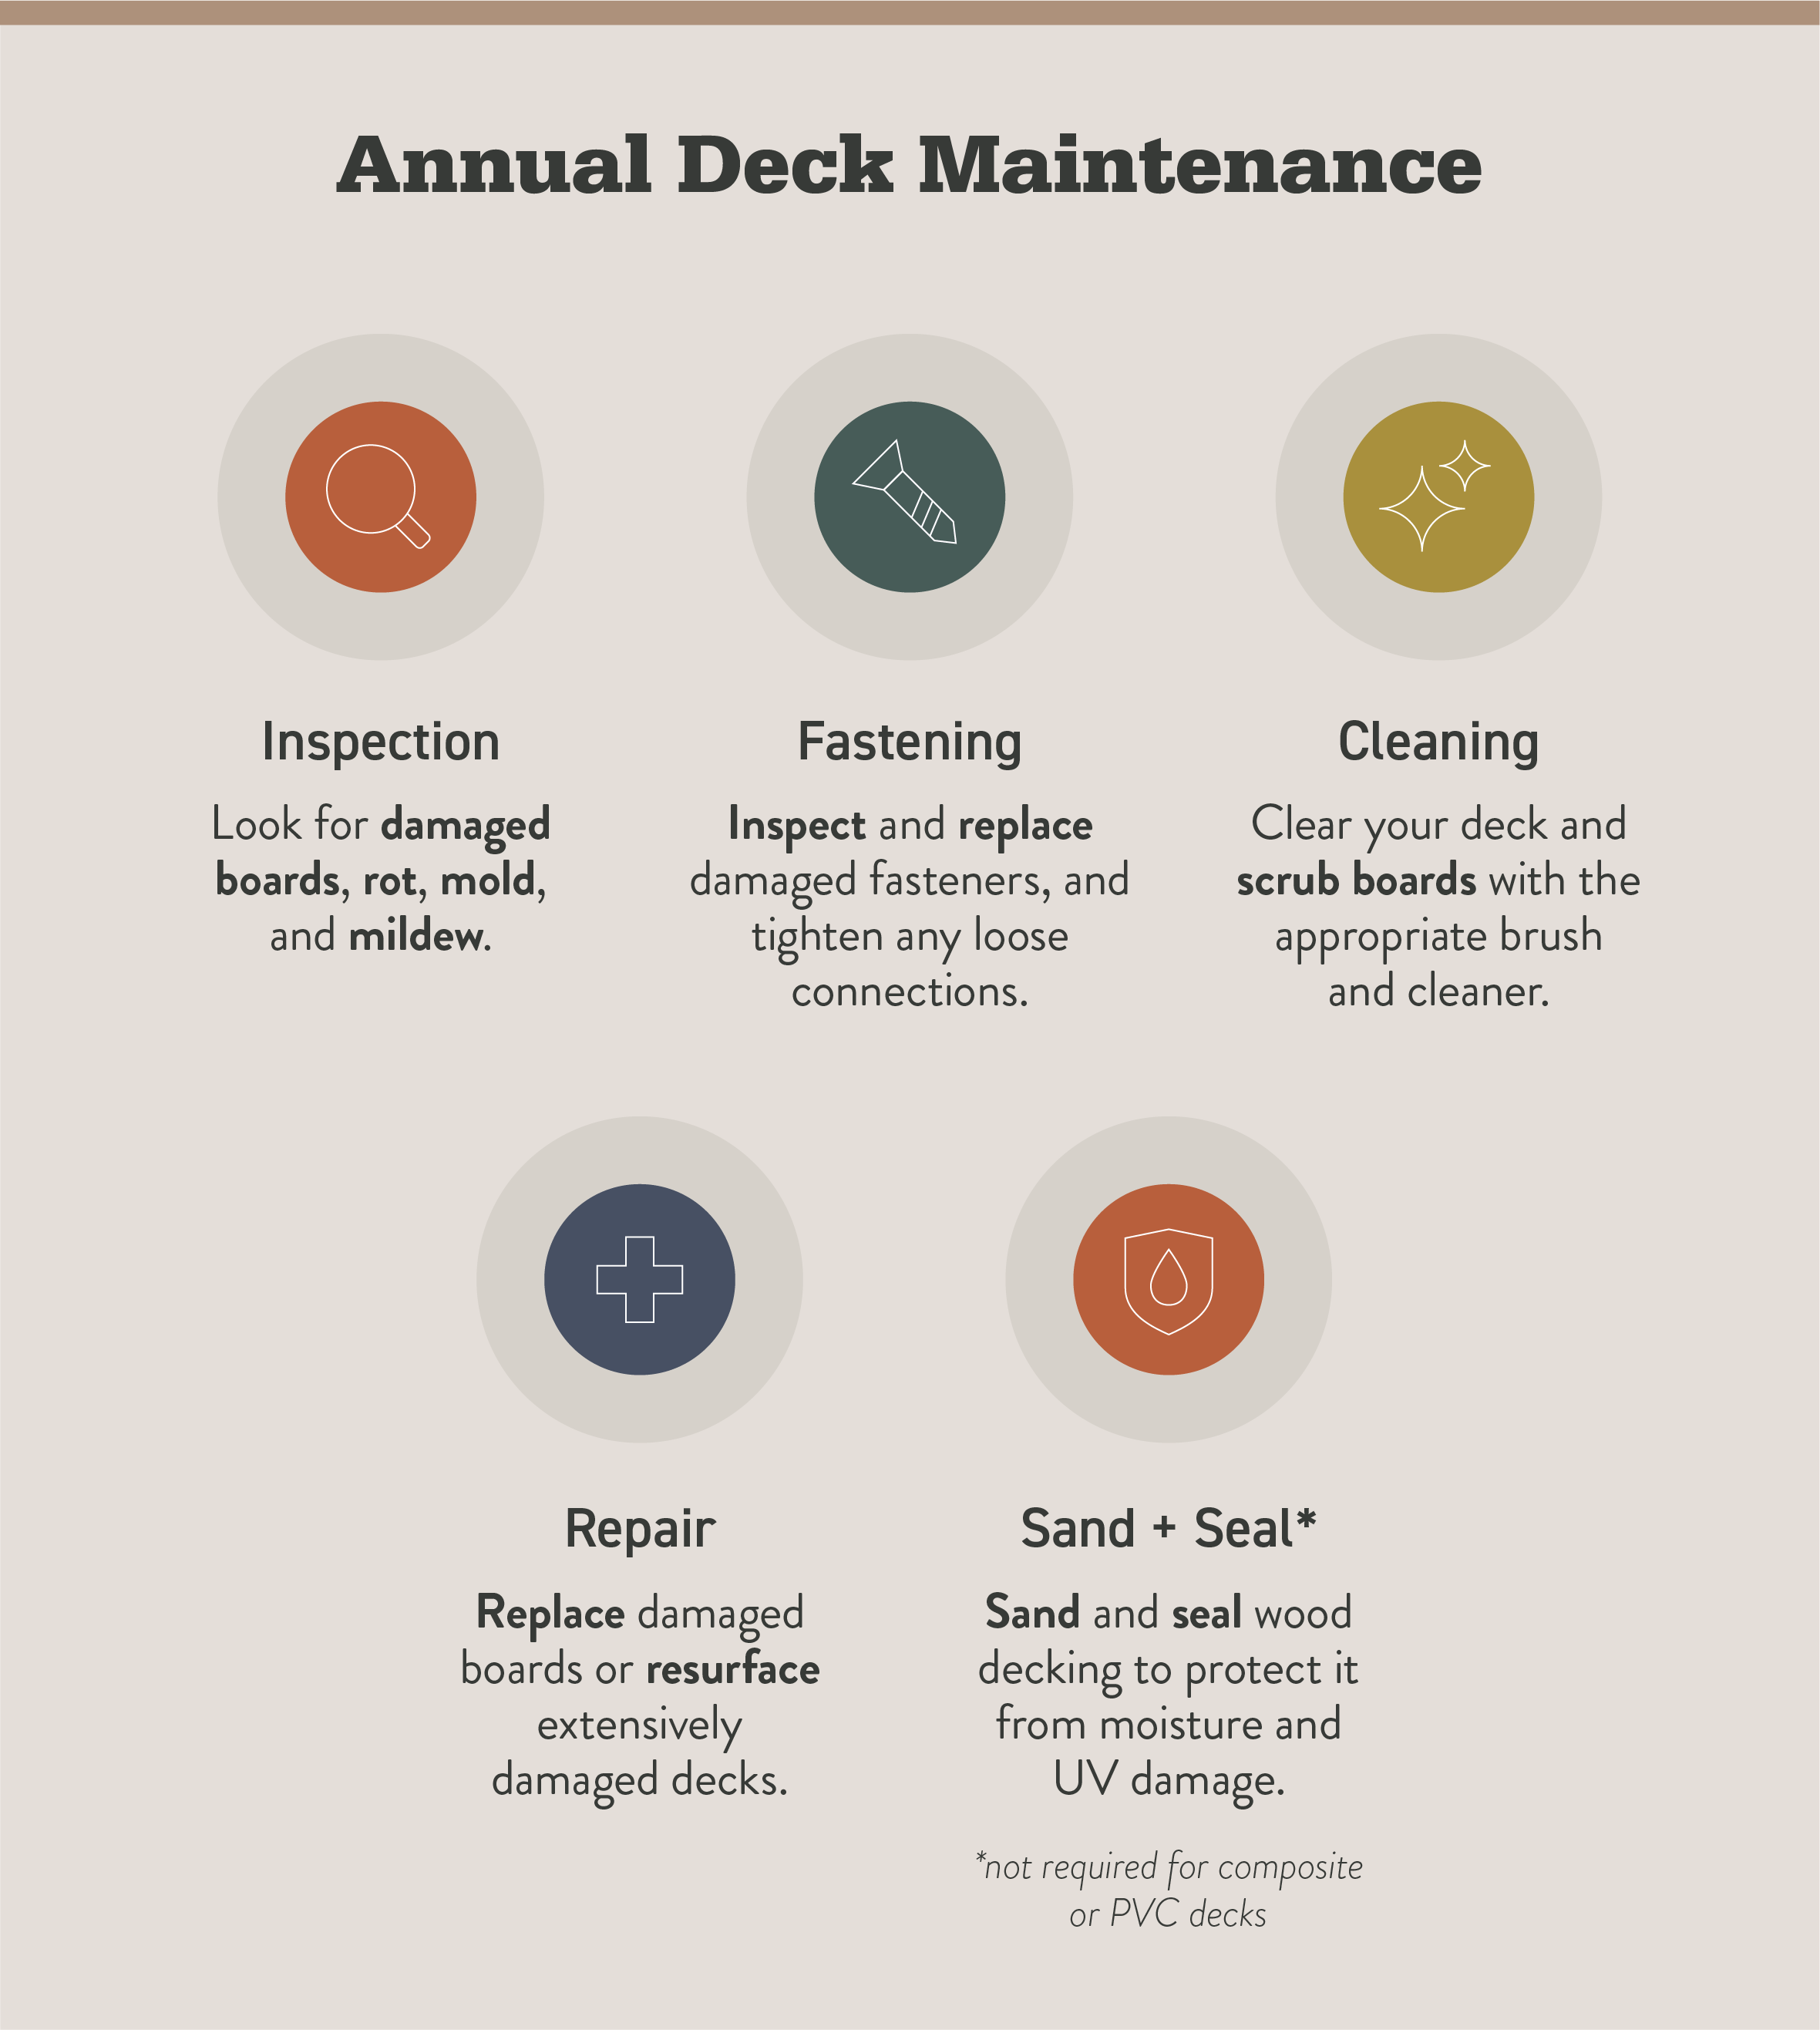 Five illustrated icons represent the 5 steps of deck maintenance, including inspection, fastening, cleaning, repair, and sand and seal.